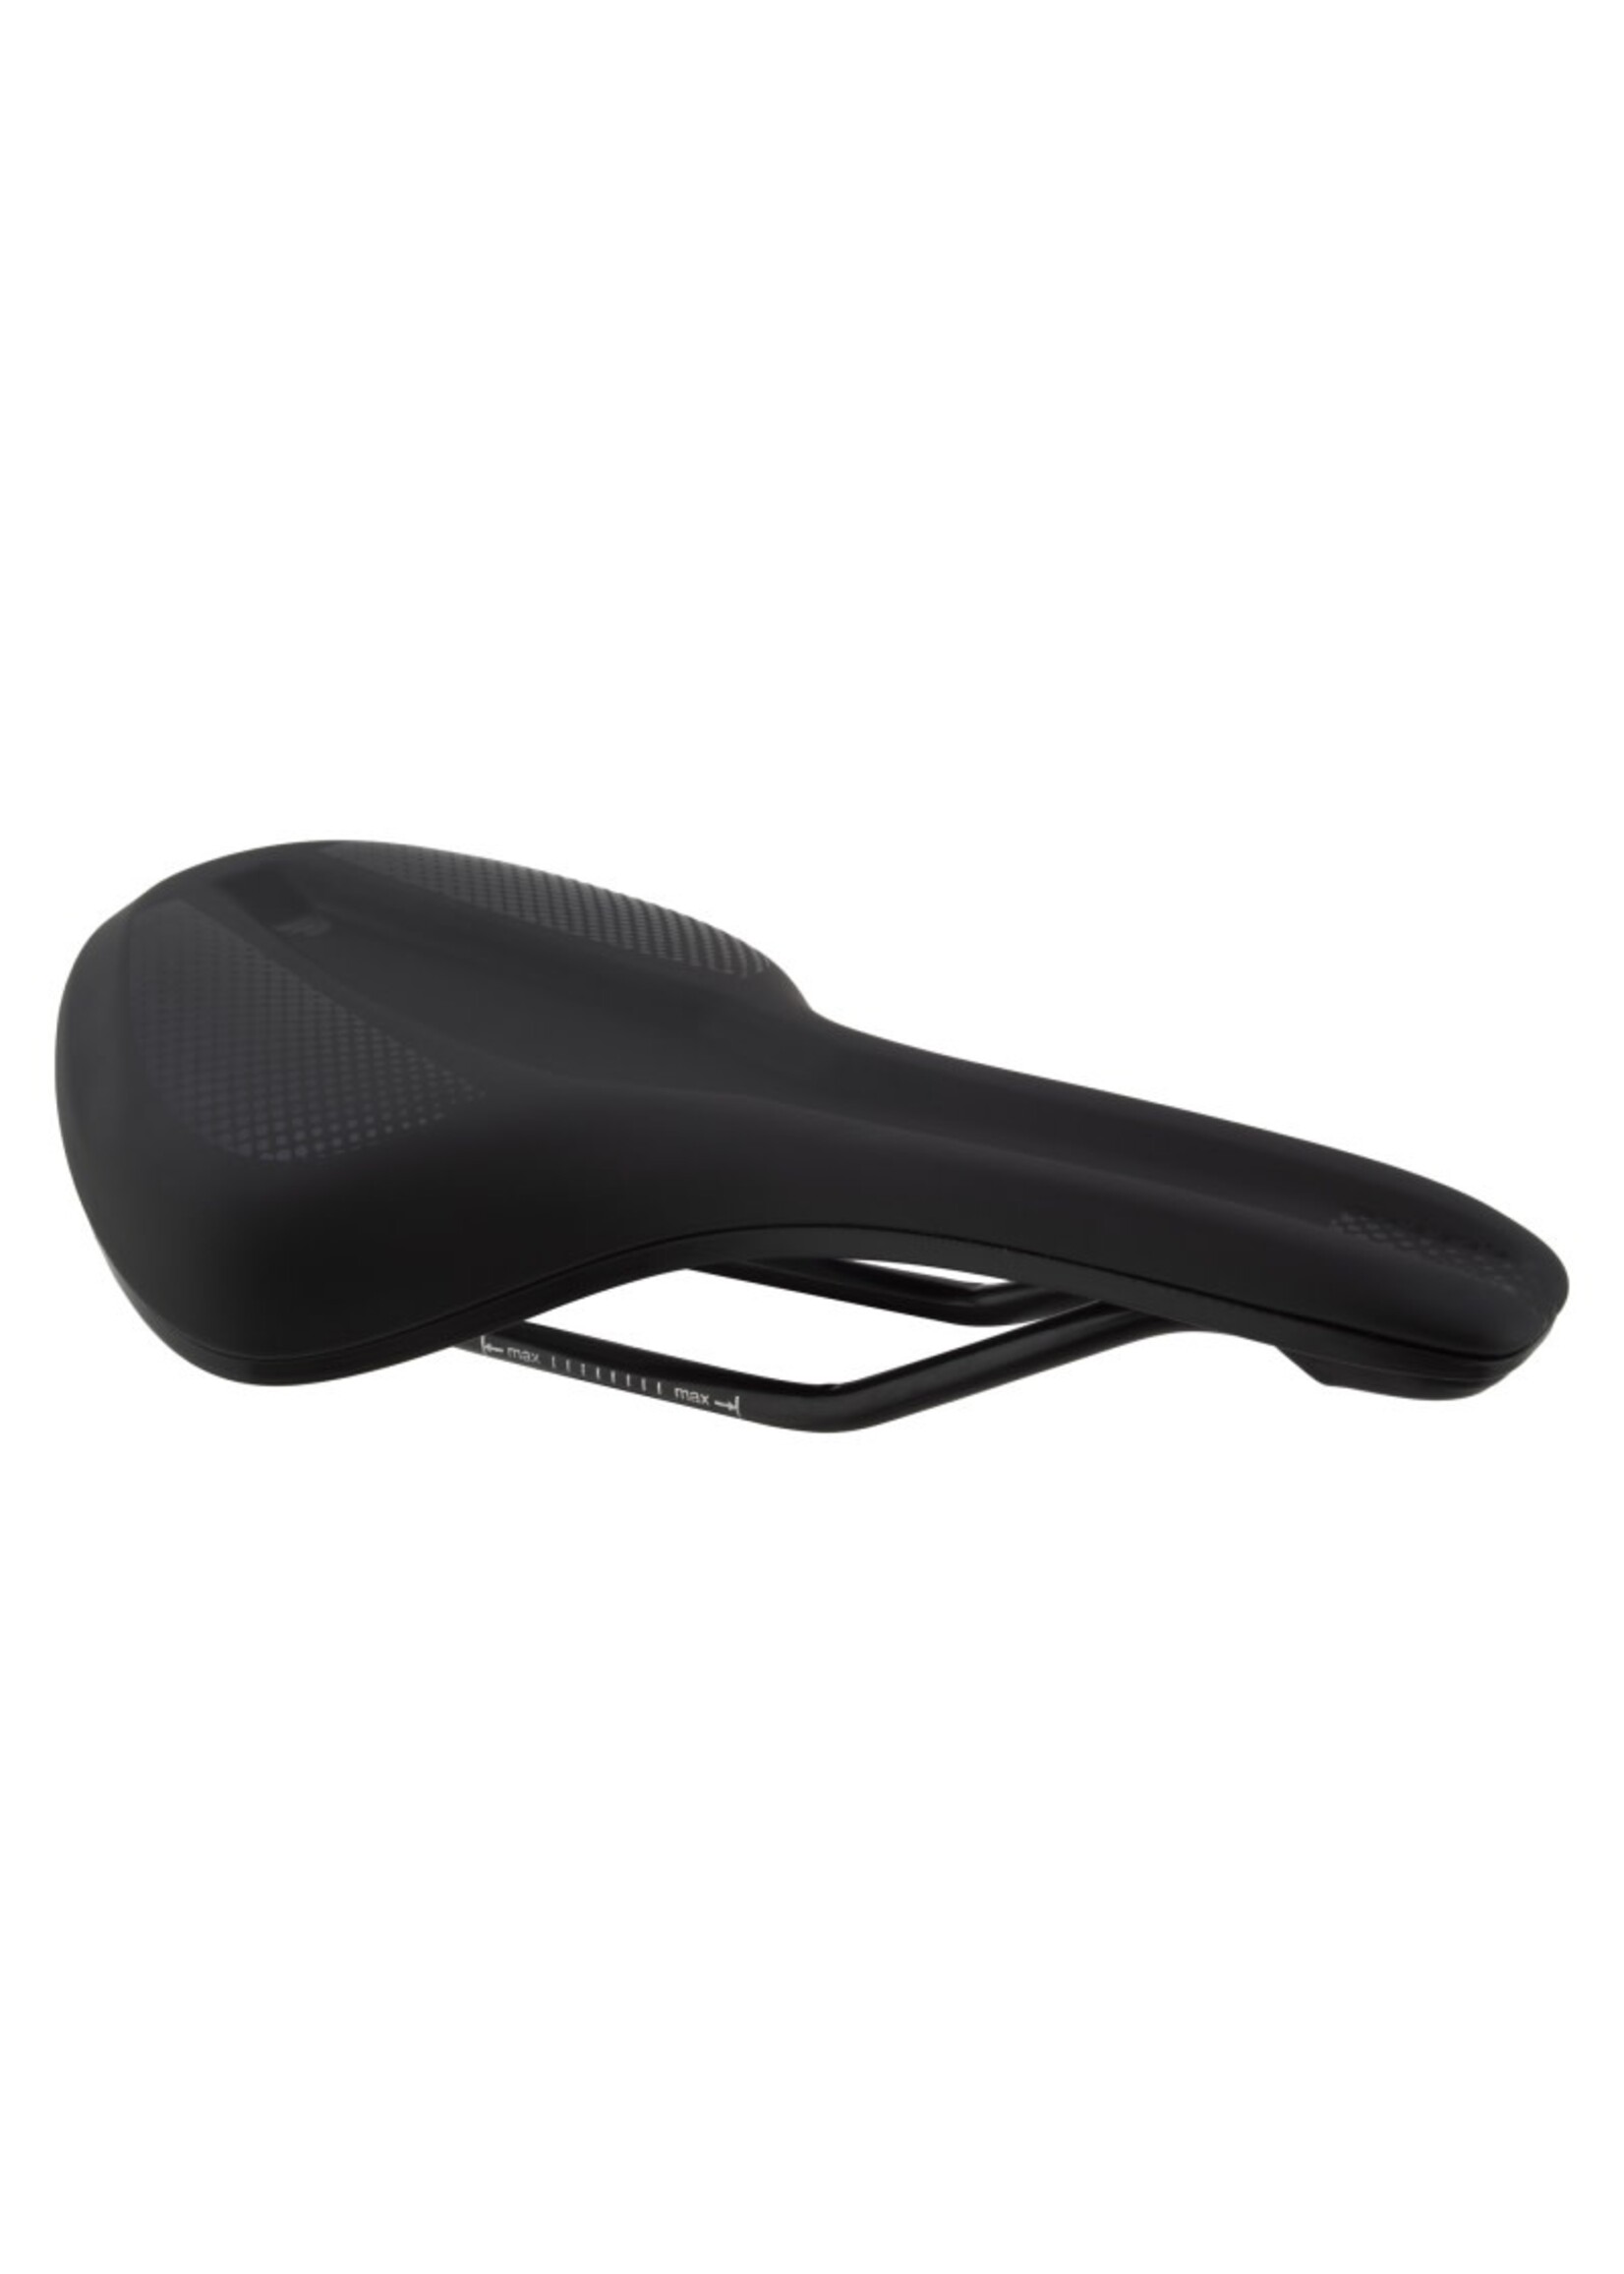 PURE CYCLES Dash Med Saddle Black